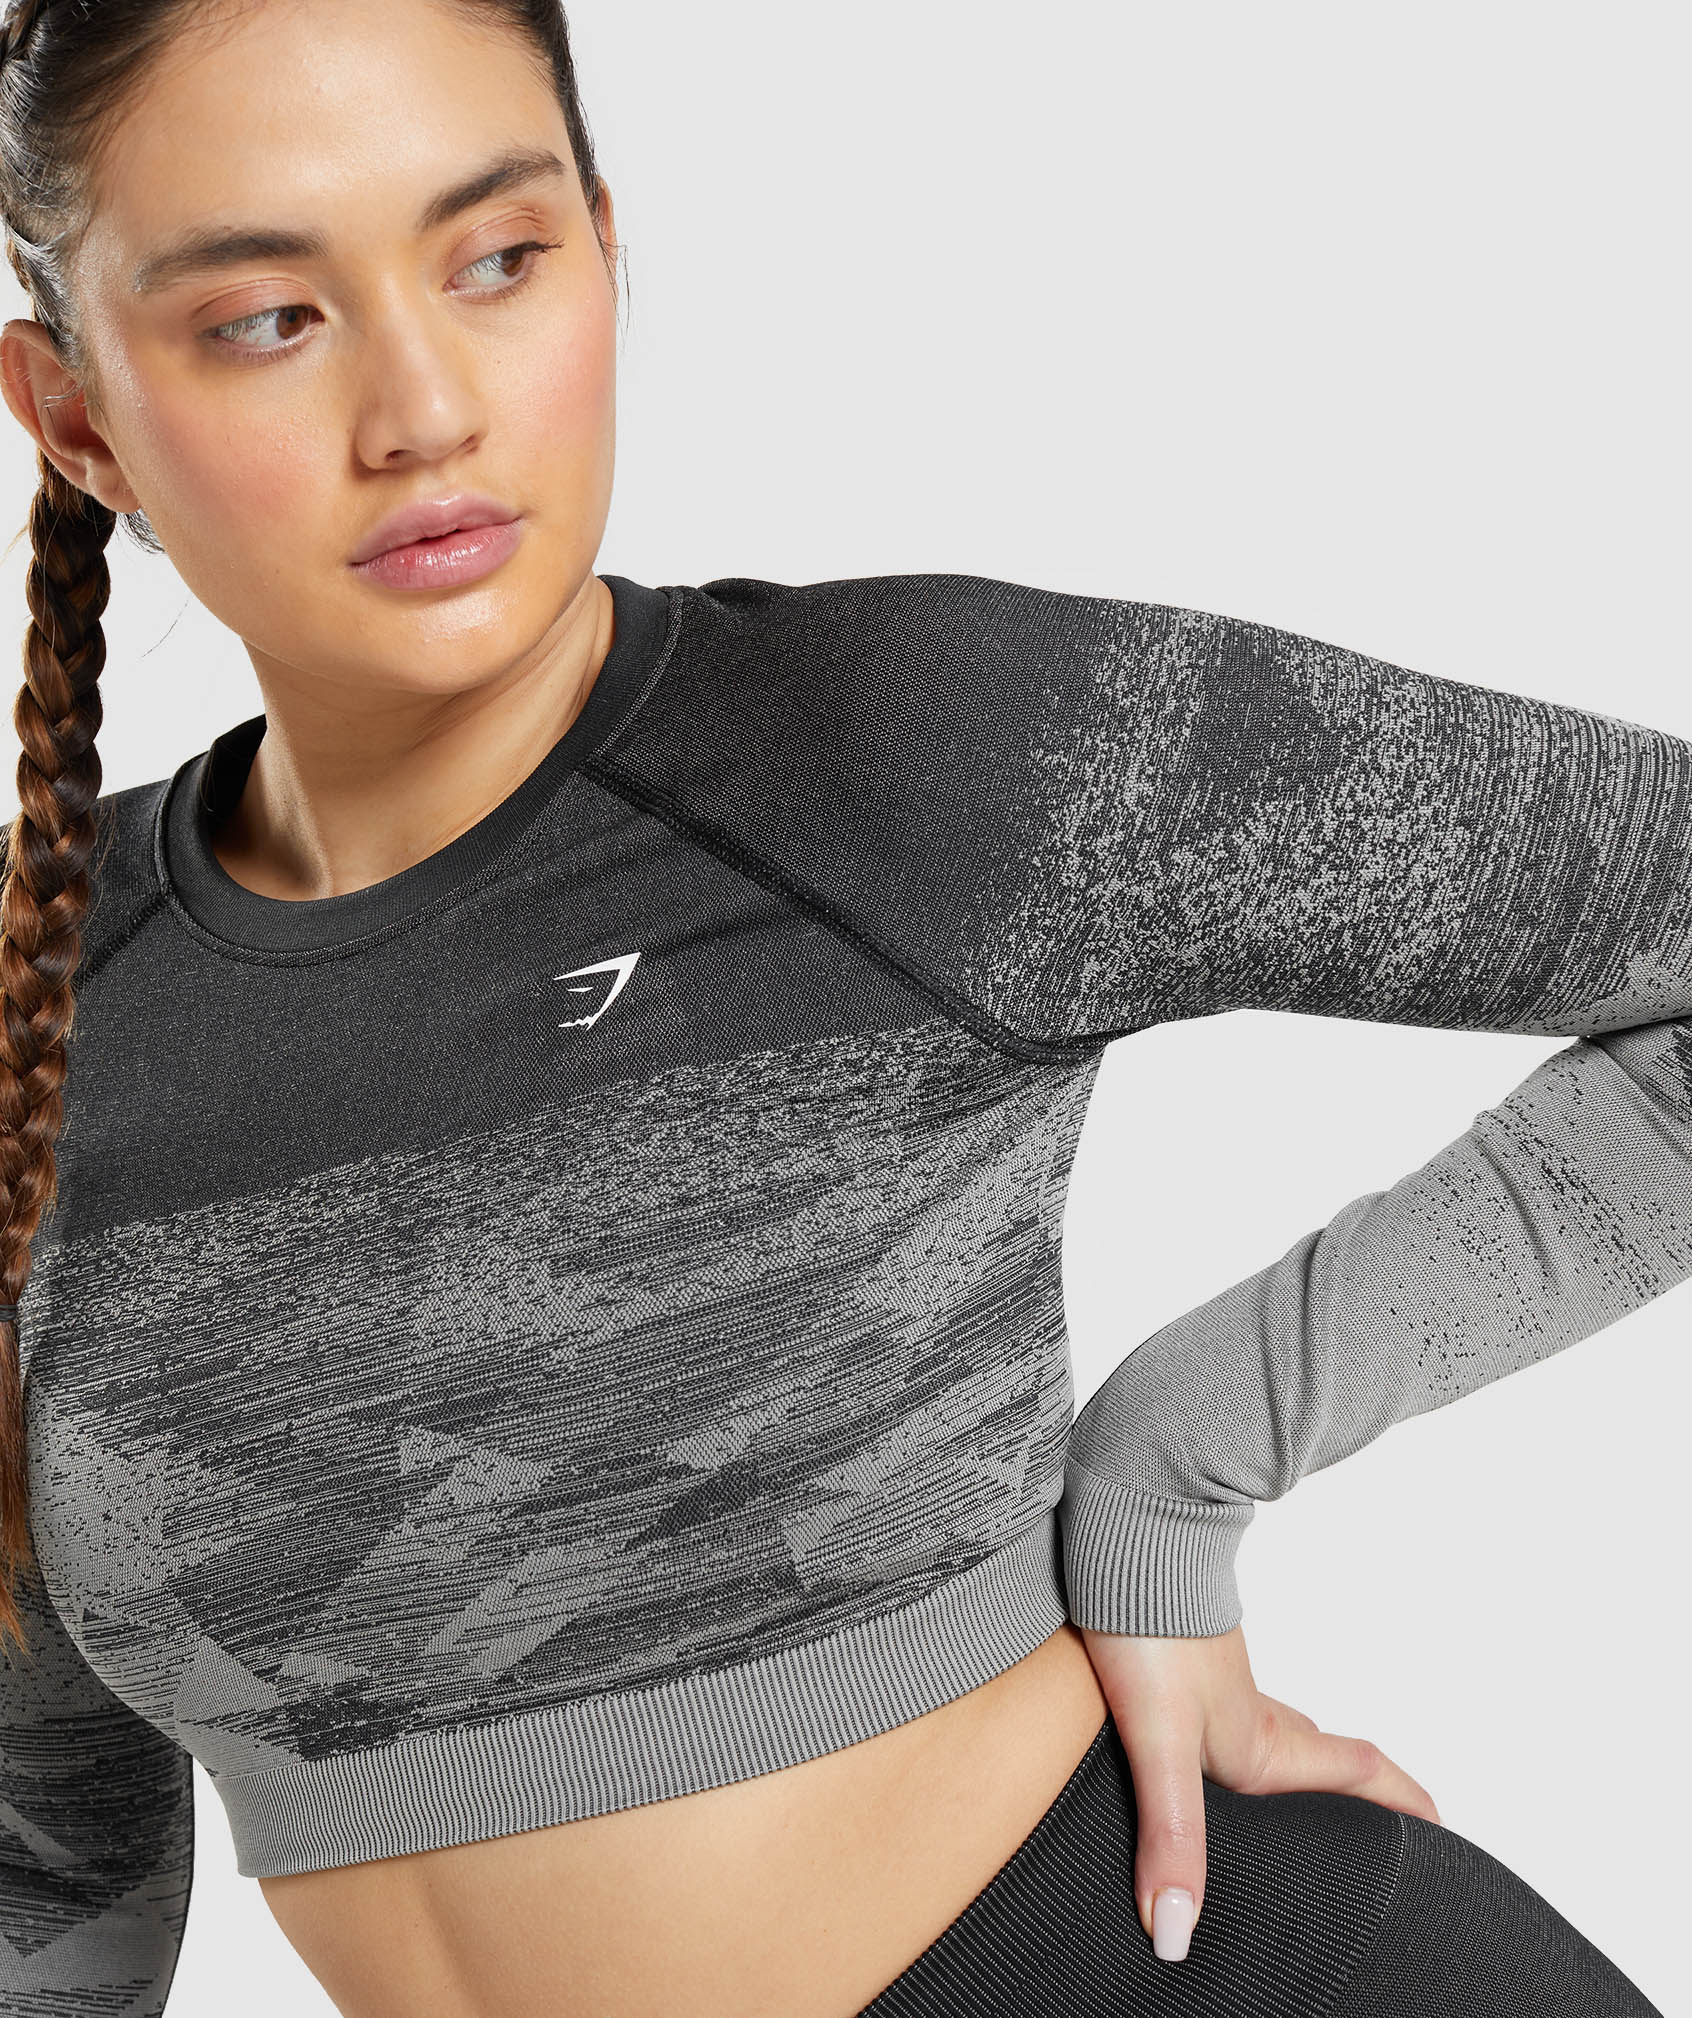 Gymshark Adapt Ombre Crop Top - Triangle, Penny Brown Print